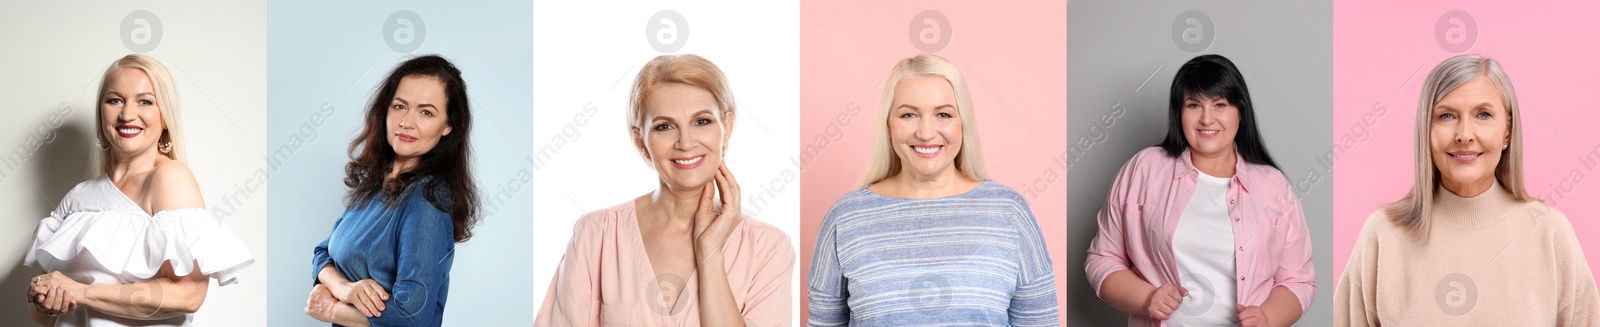 Image of Beautiful ladies on different color backgrounds, collection of photos